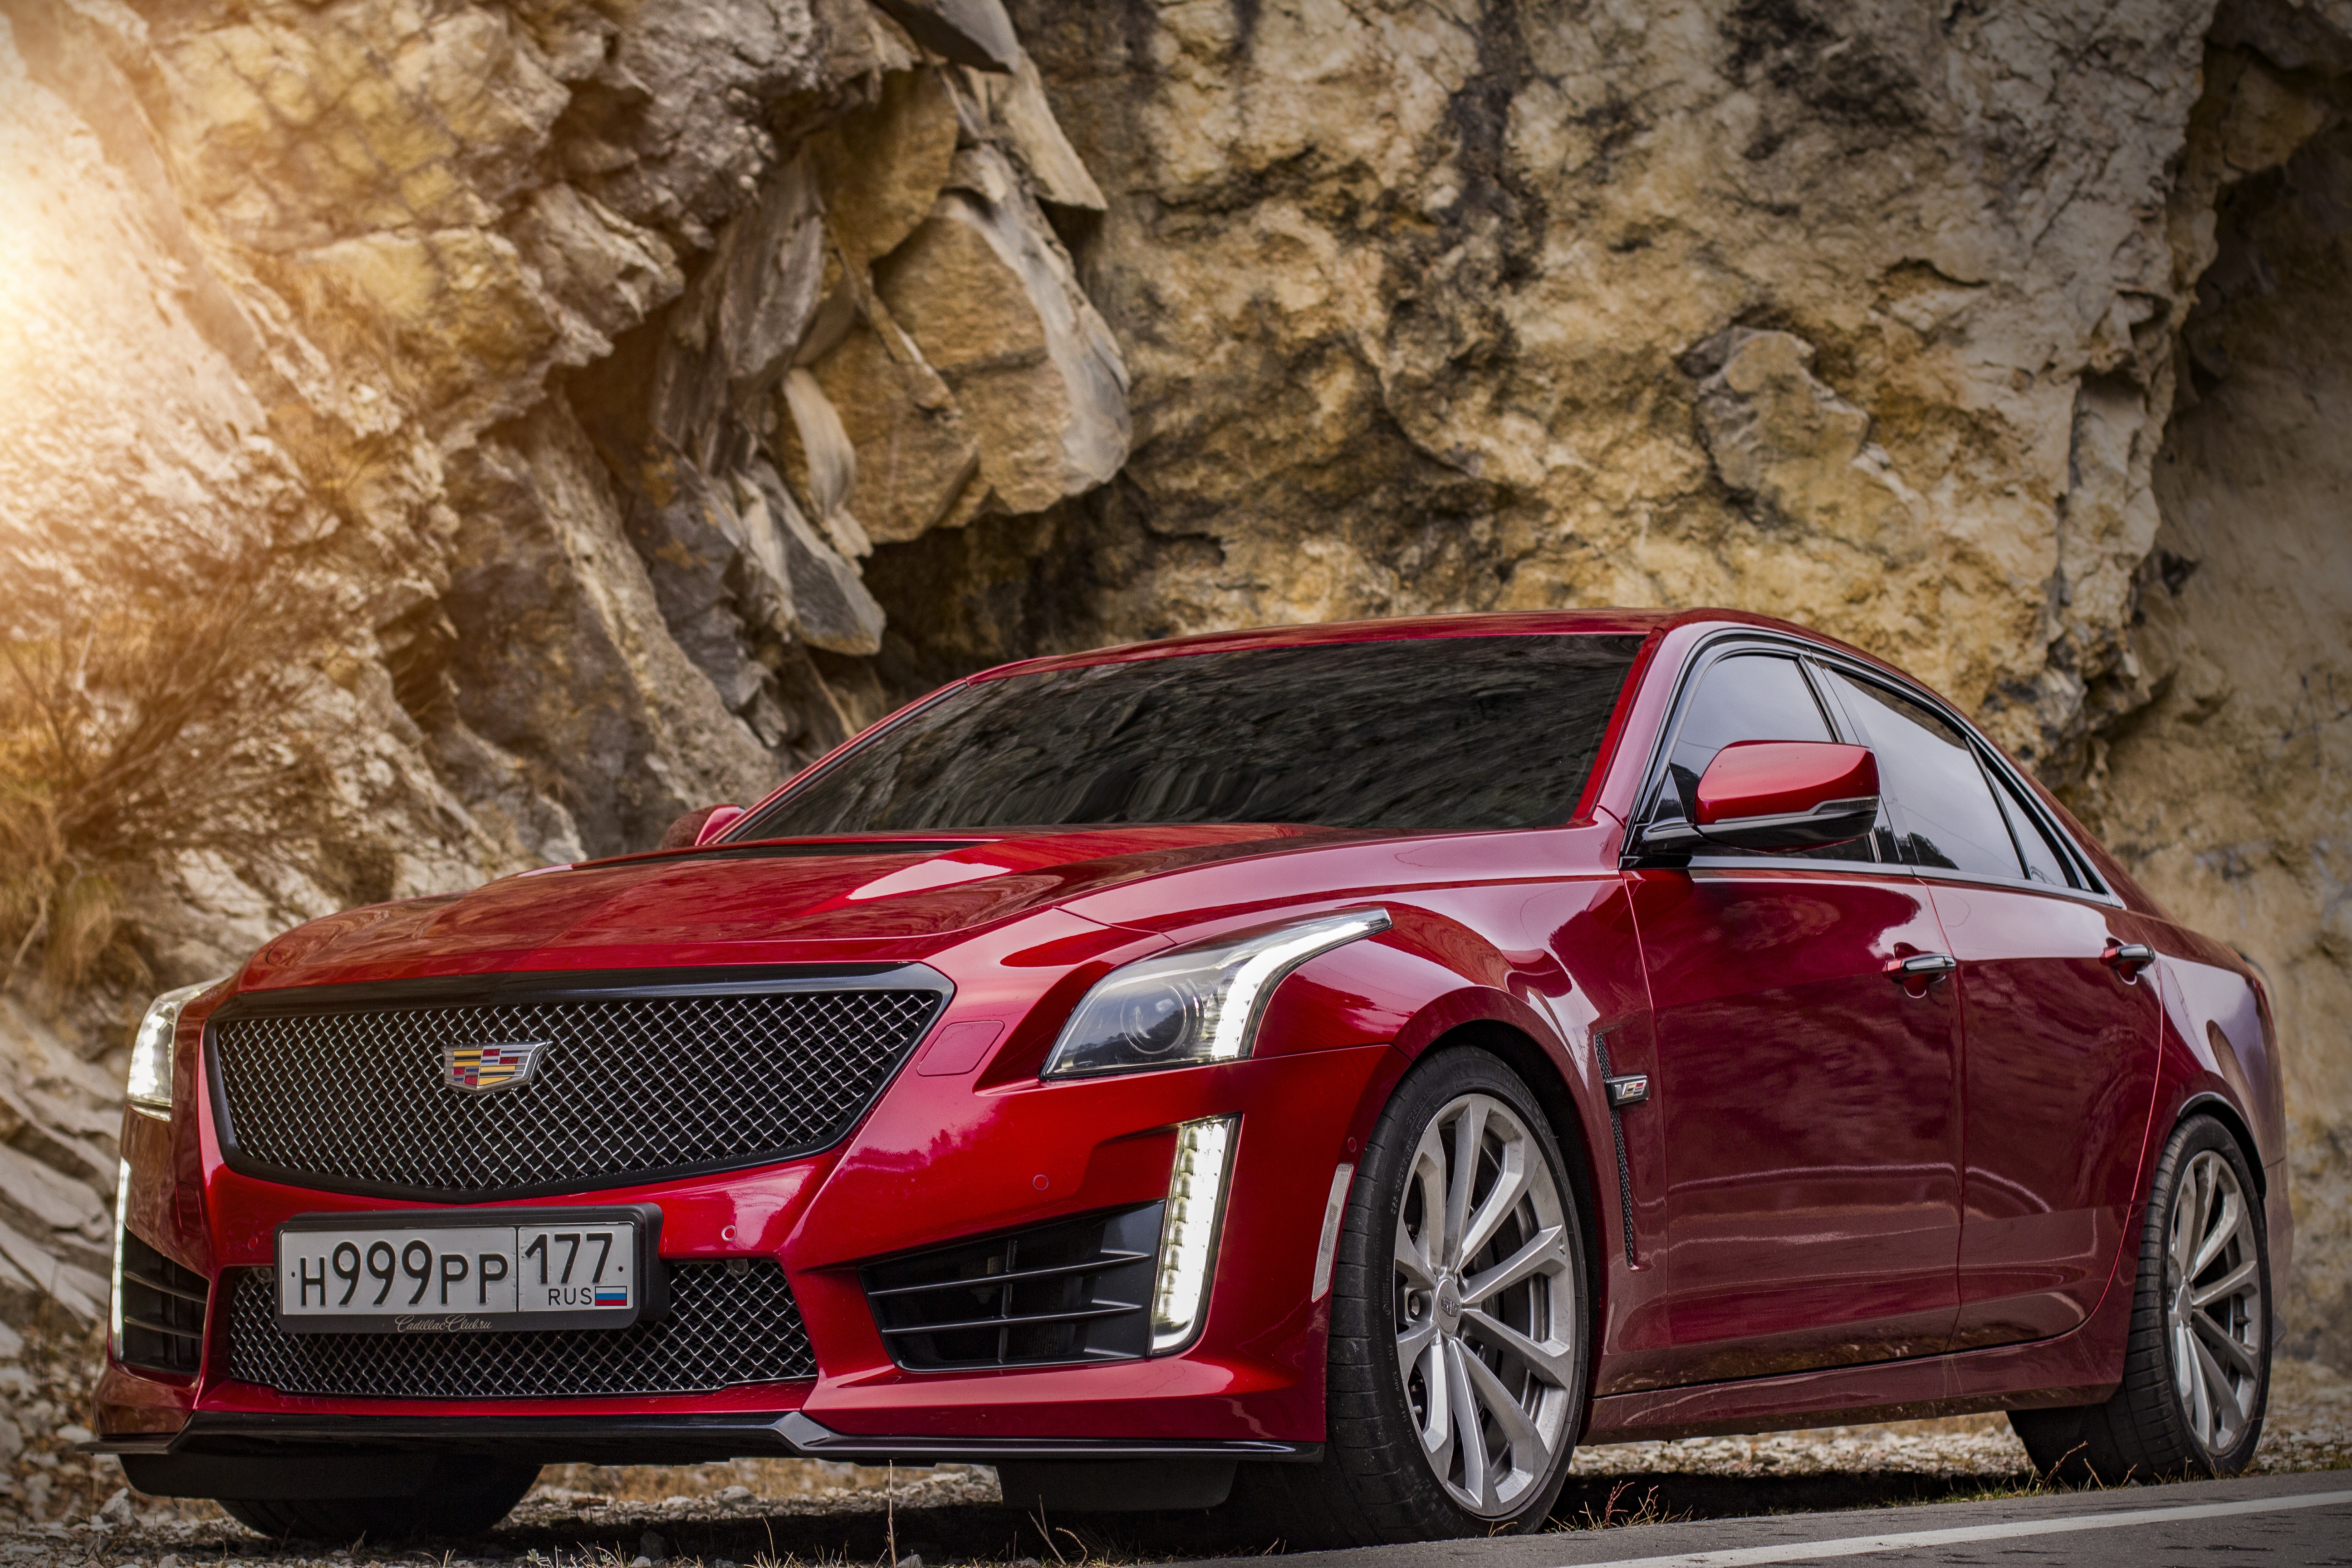 Cts v HD wallpapers free download  Wallpaperbetter